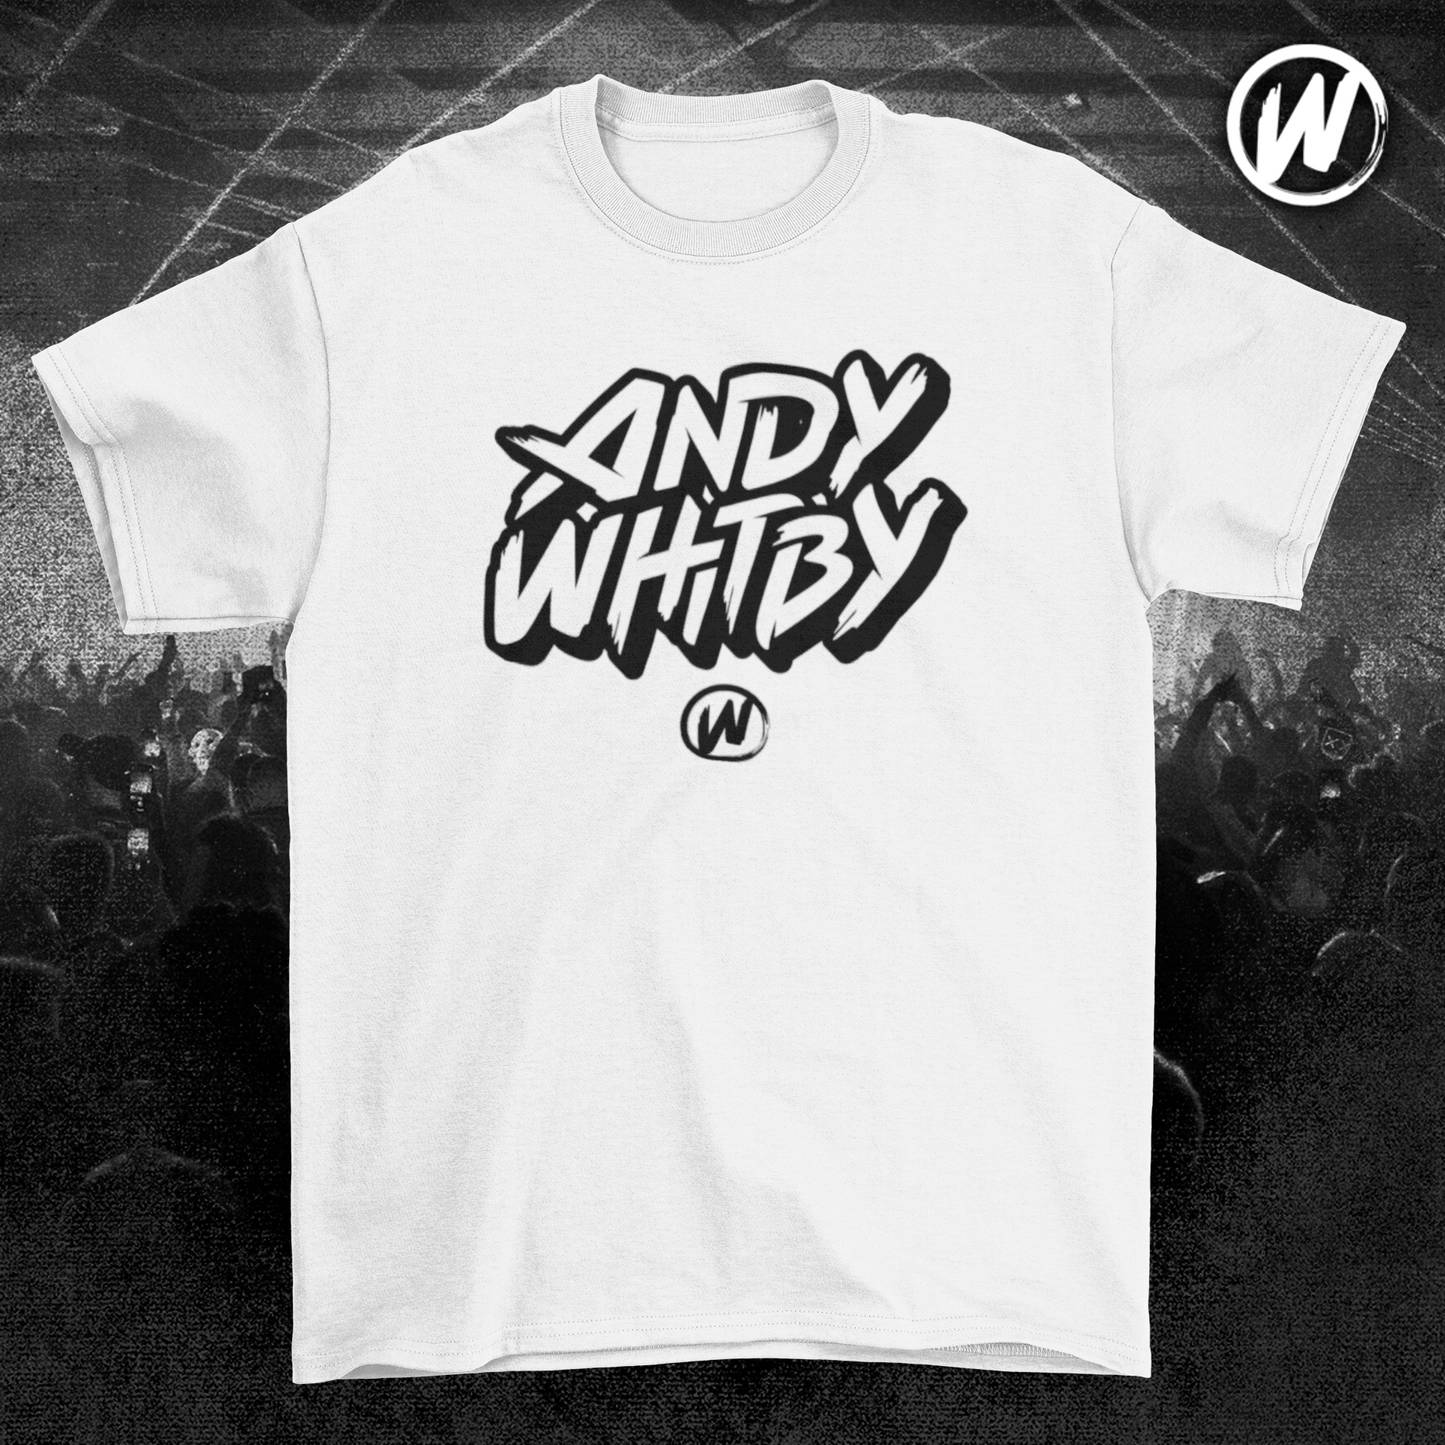 Andy Whitby Logo T-Shirt (White)